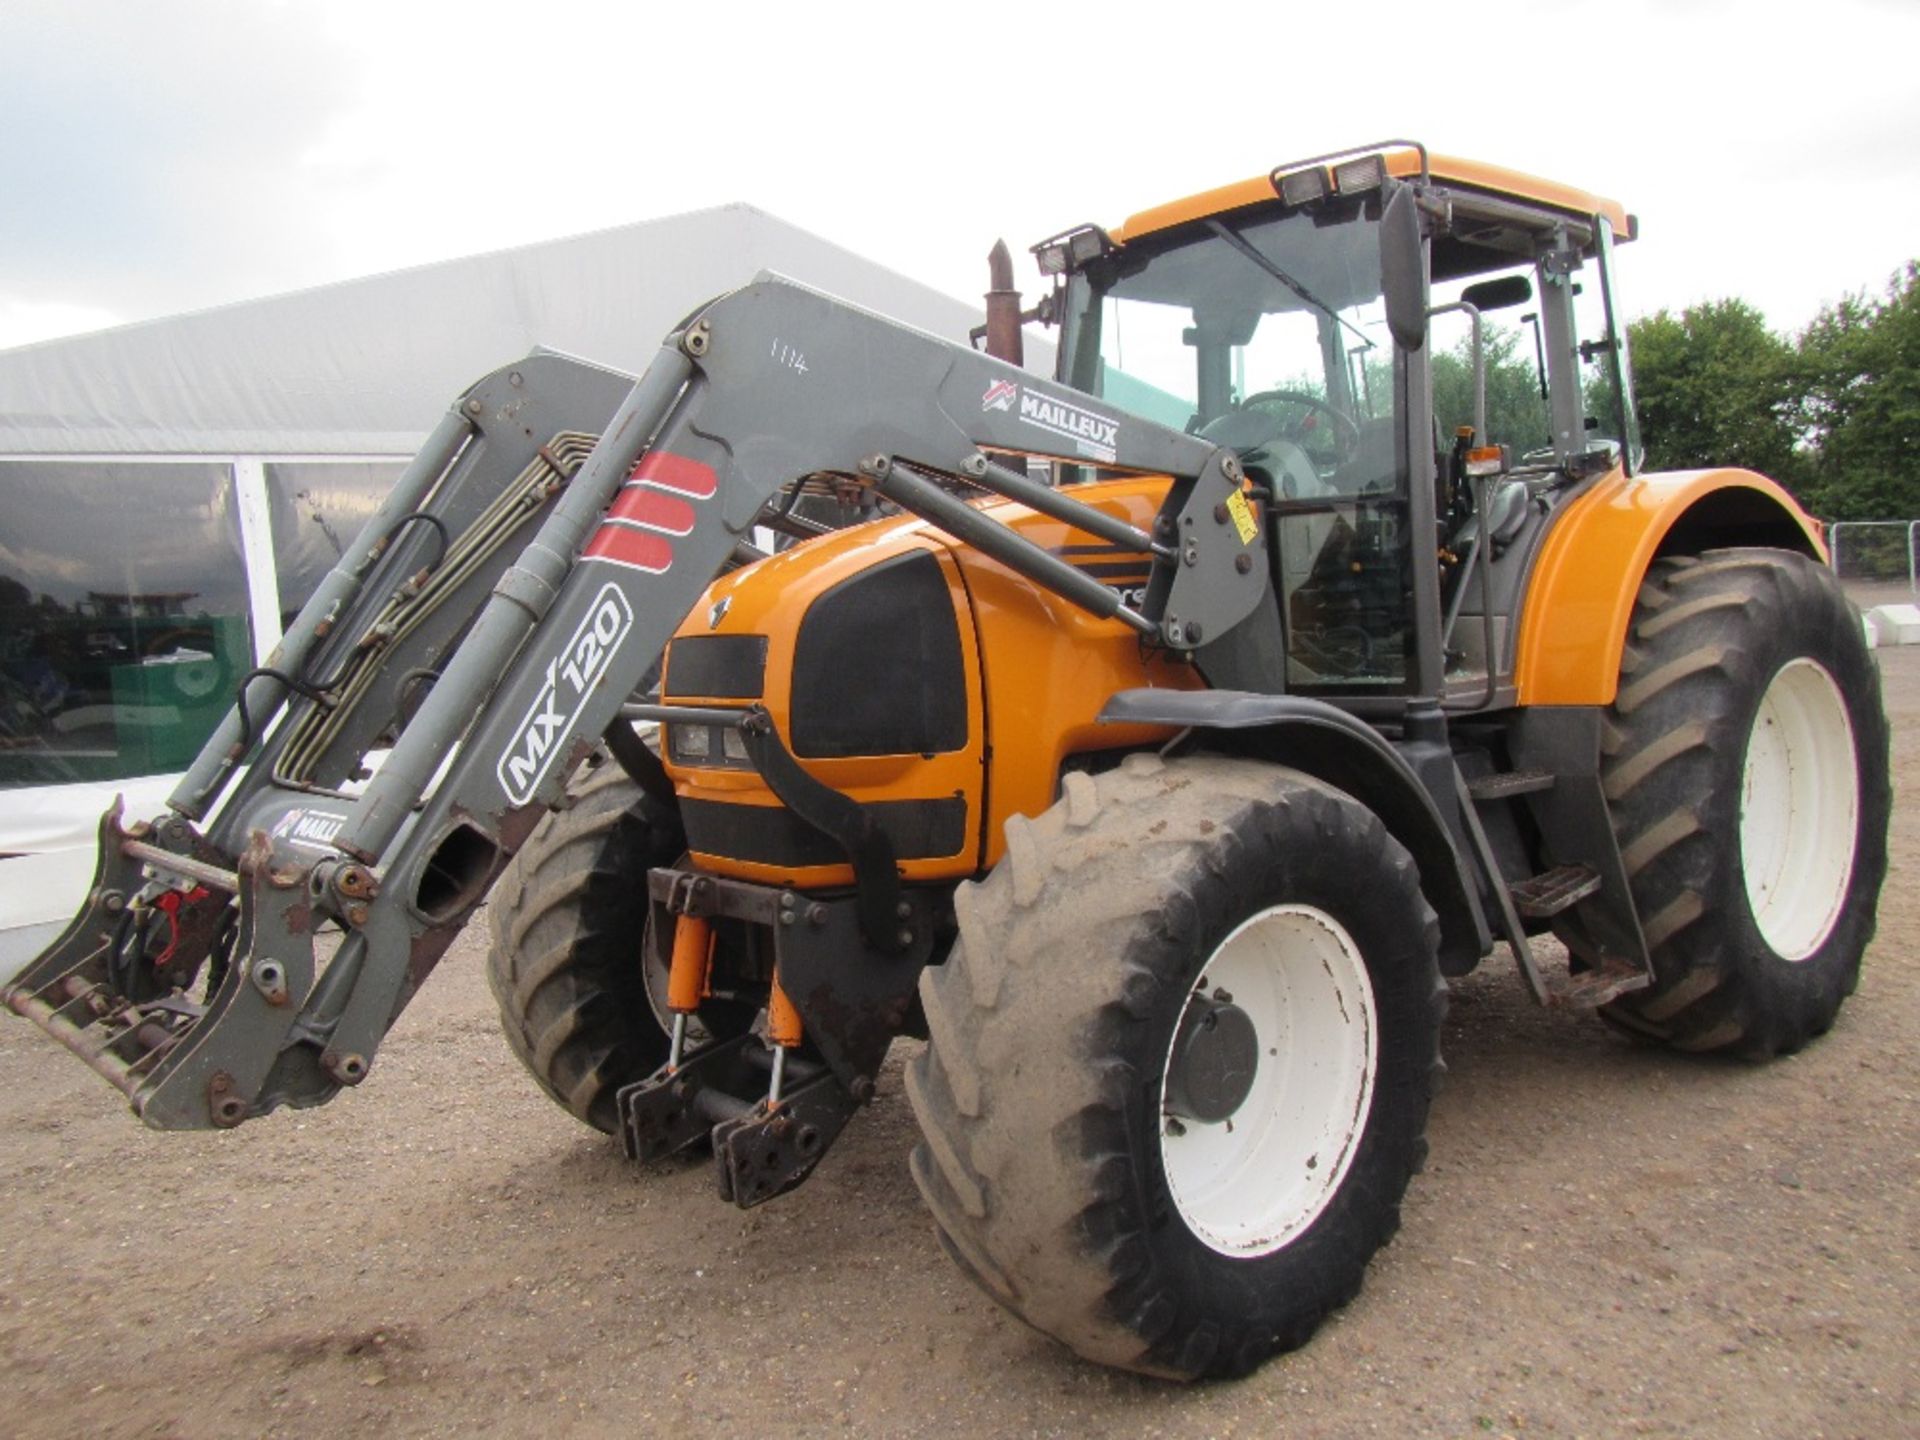 Renault Ares 815 RZ Tractor with Chilton MX120 Loader & Cab Suspension. Reg. No. SV51 ETL